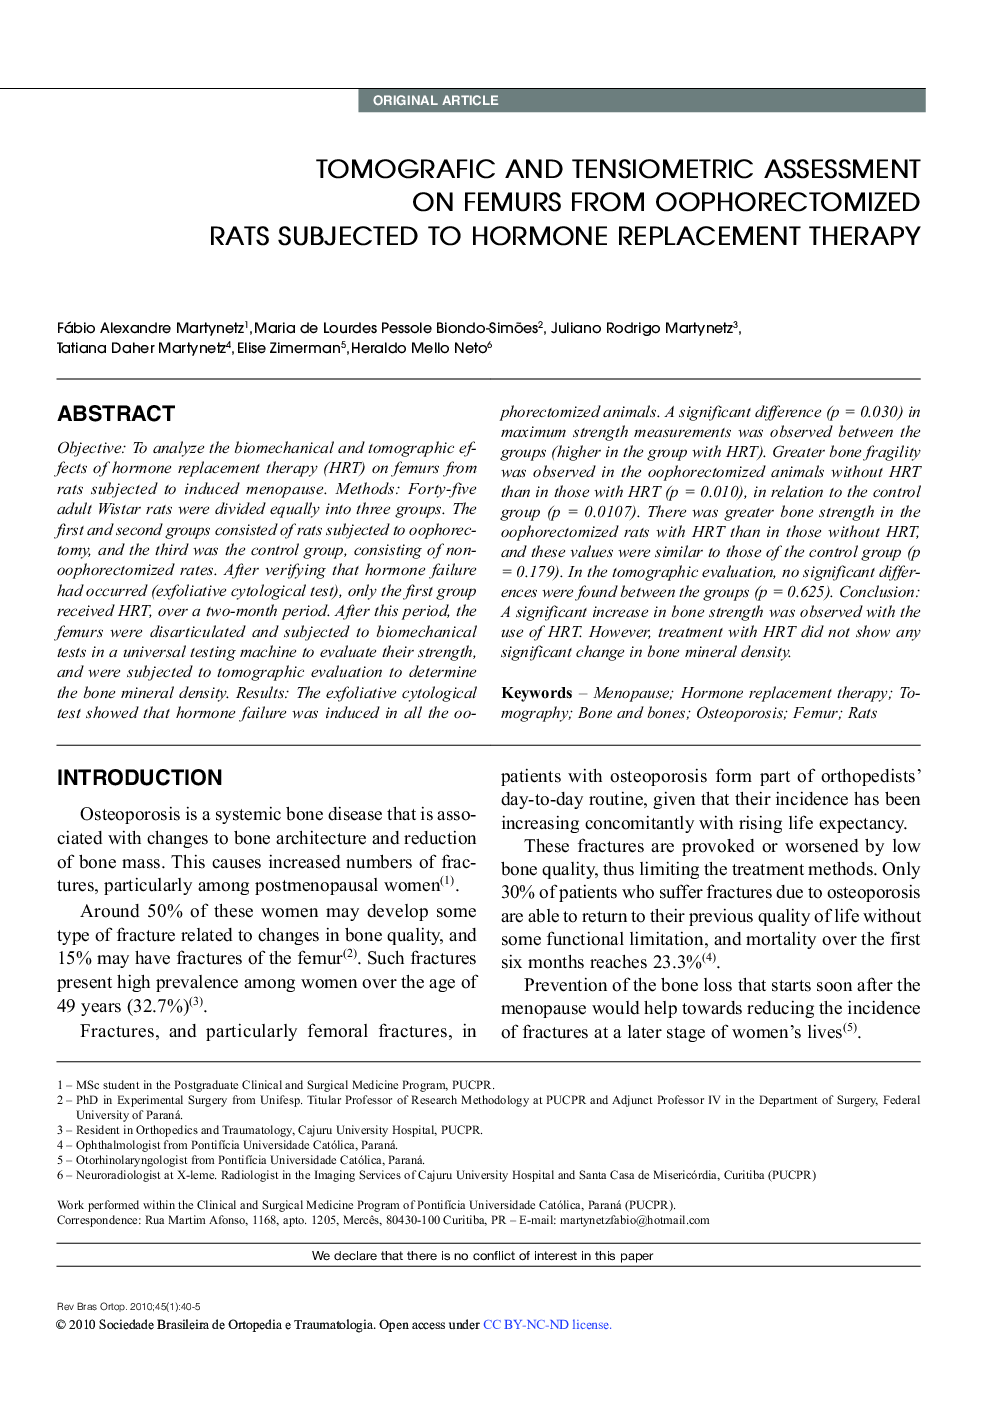 TOMOGRAFIC AND TENSIOMETRIC ASSESSMENT ON FEMURS FROM OOPHORECTOMIZED RATS SUBJECTED TO HORMONE REPLACEMENT THERAPY 